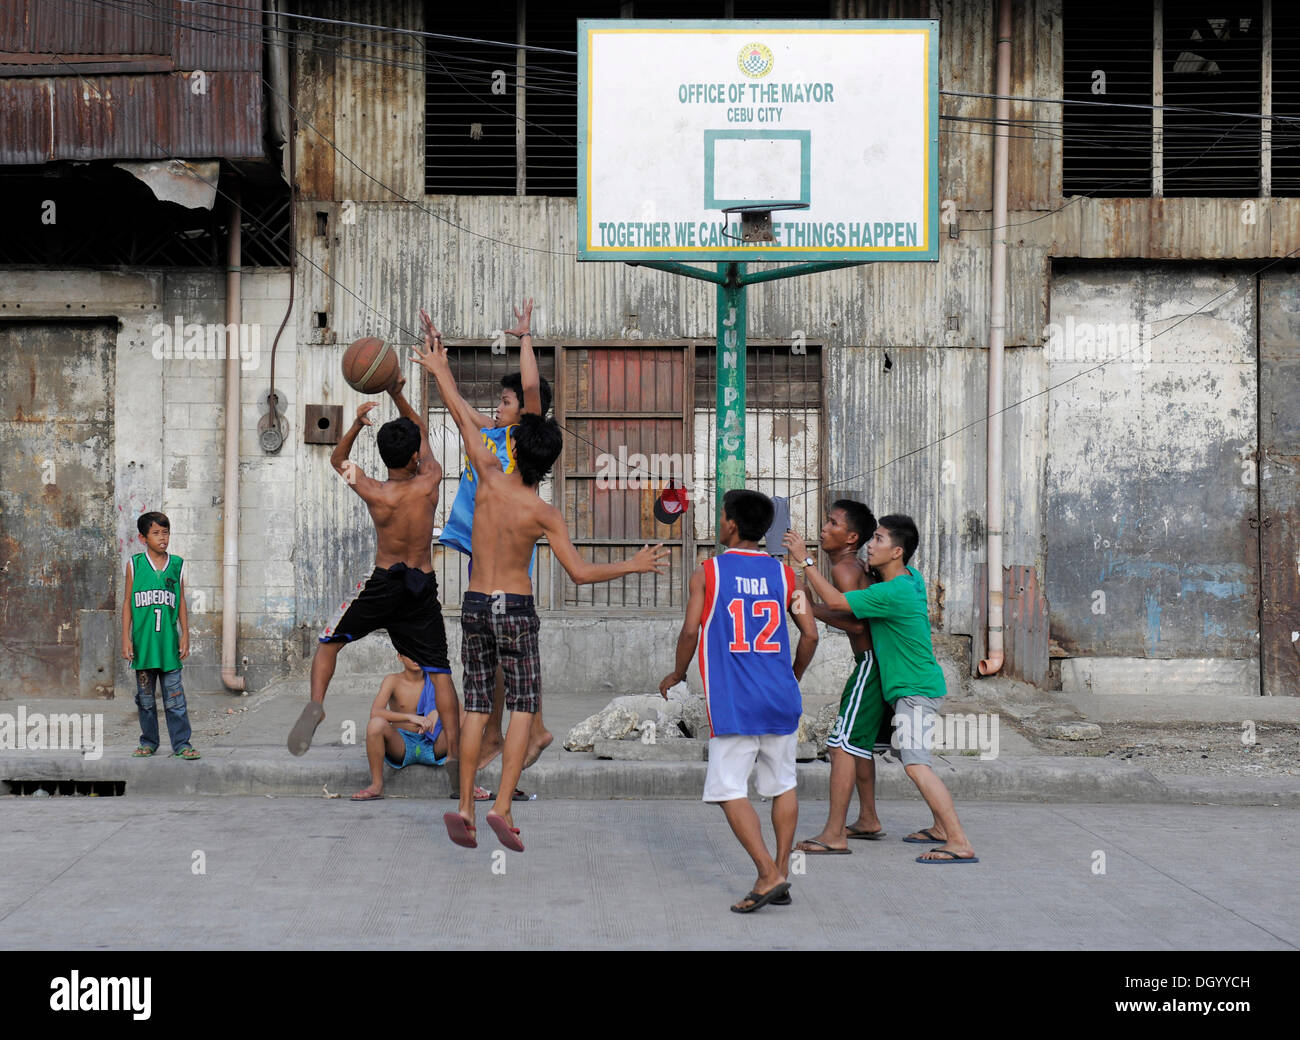 Street Basketball Kids High Resolution Stock Photography and Images - Alamy